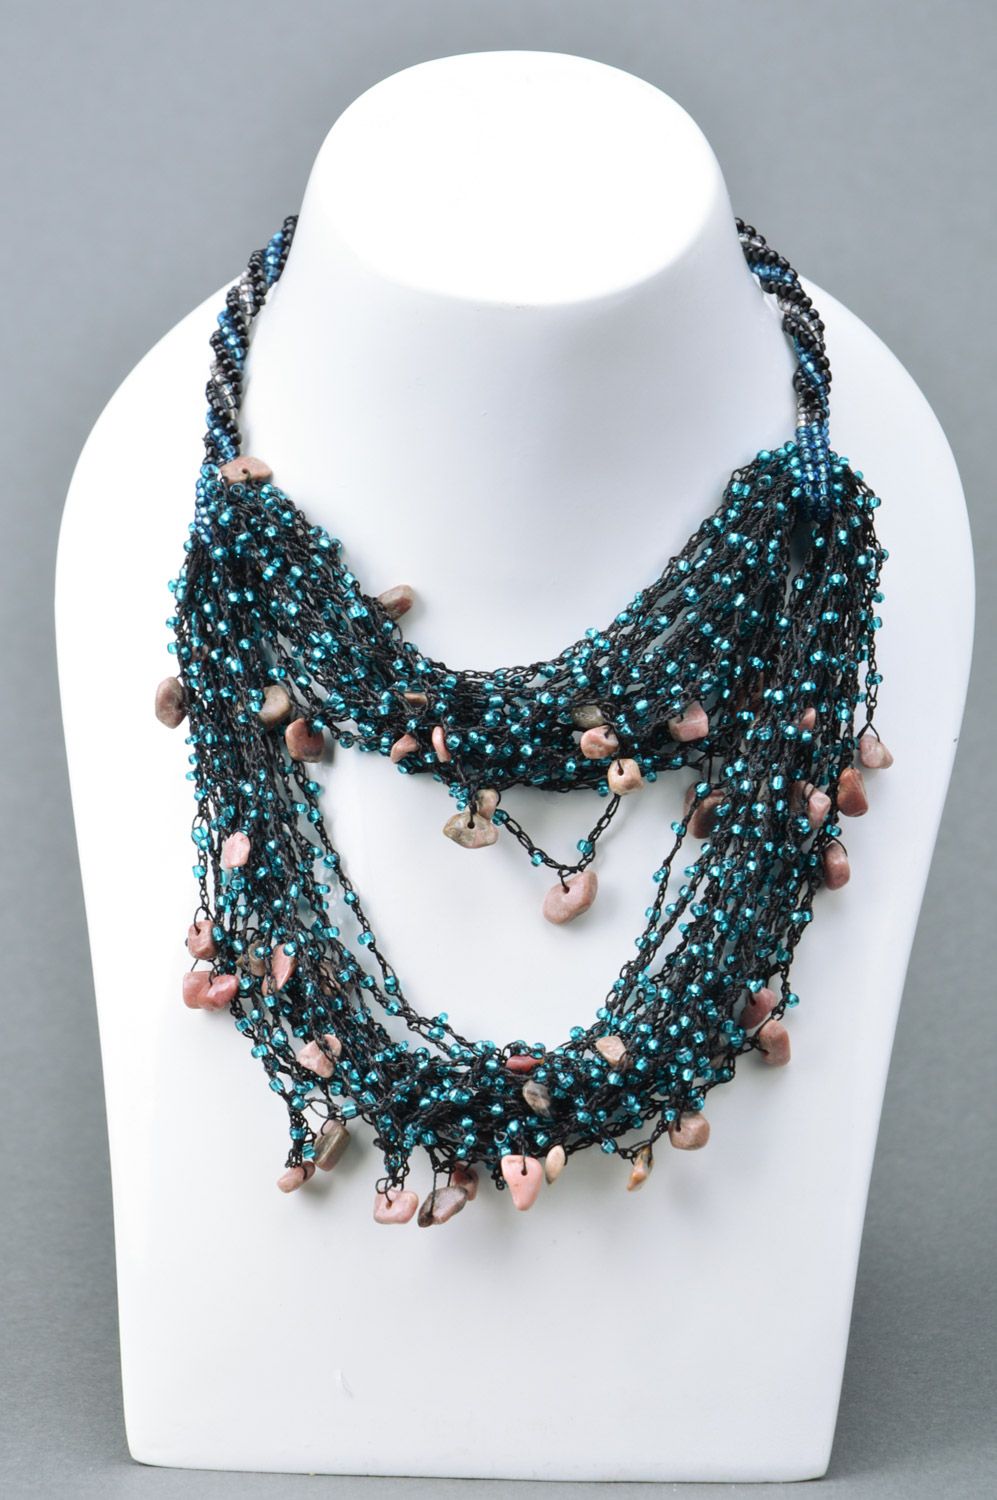 Handmade airy volume necklace woven of Czech beads and corals in dark colors photo 1